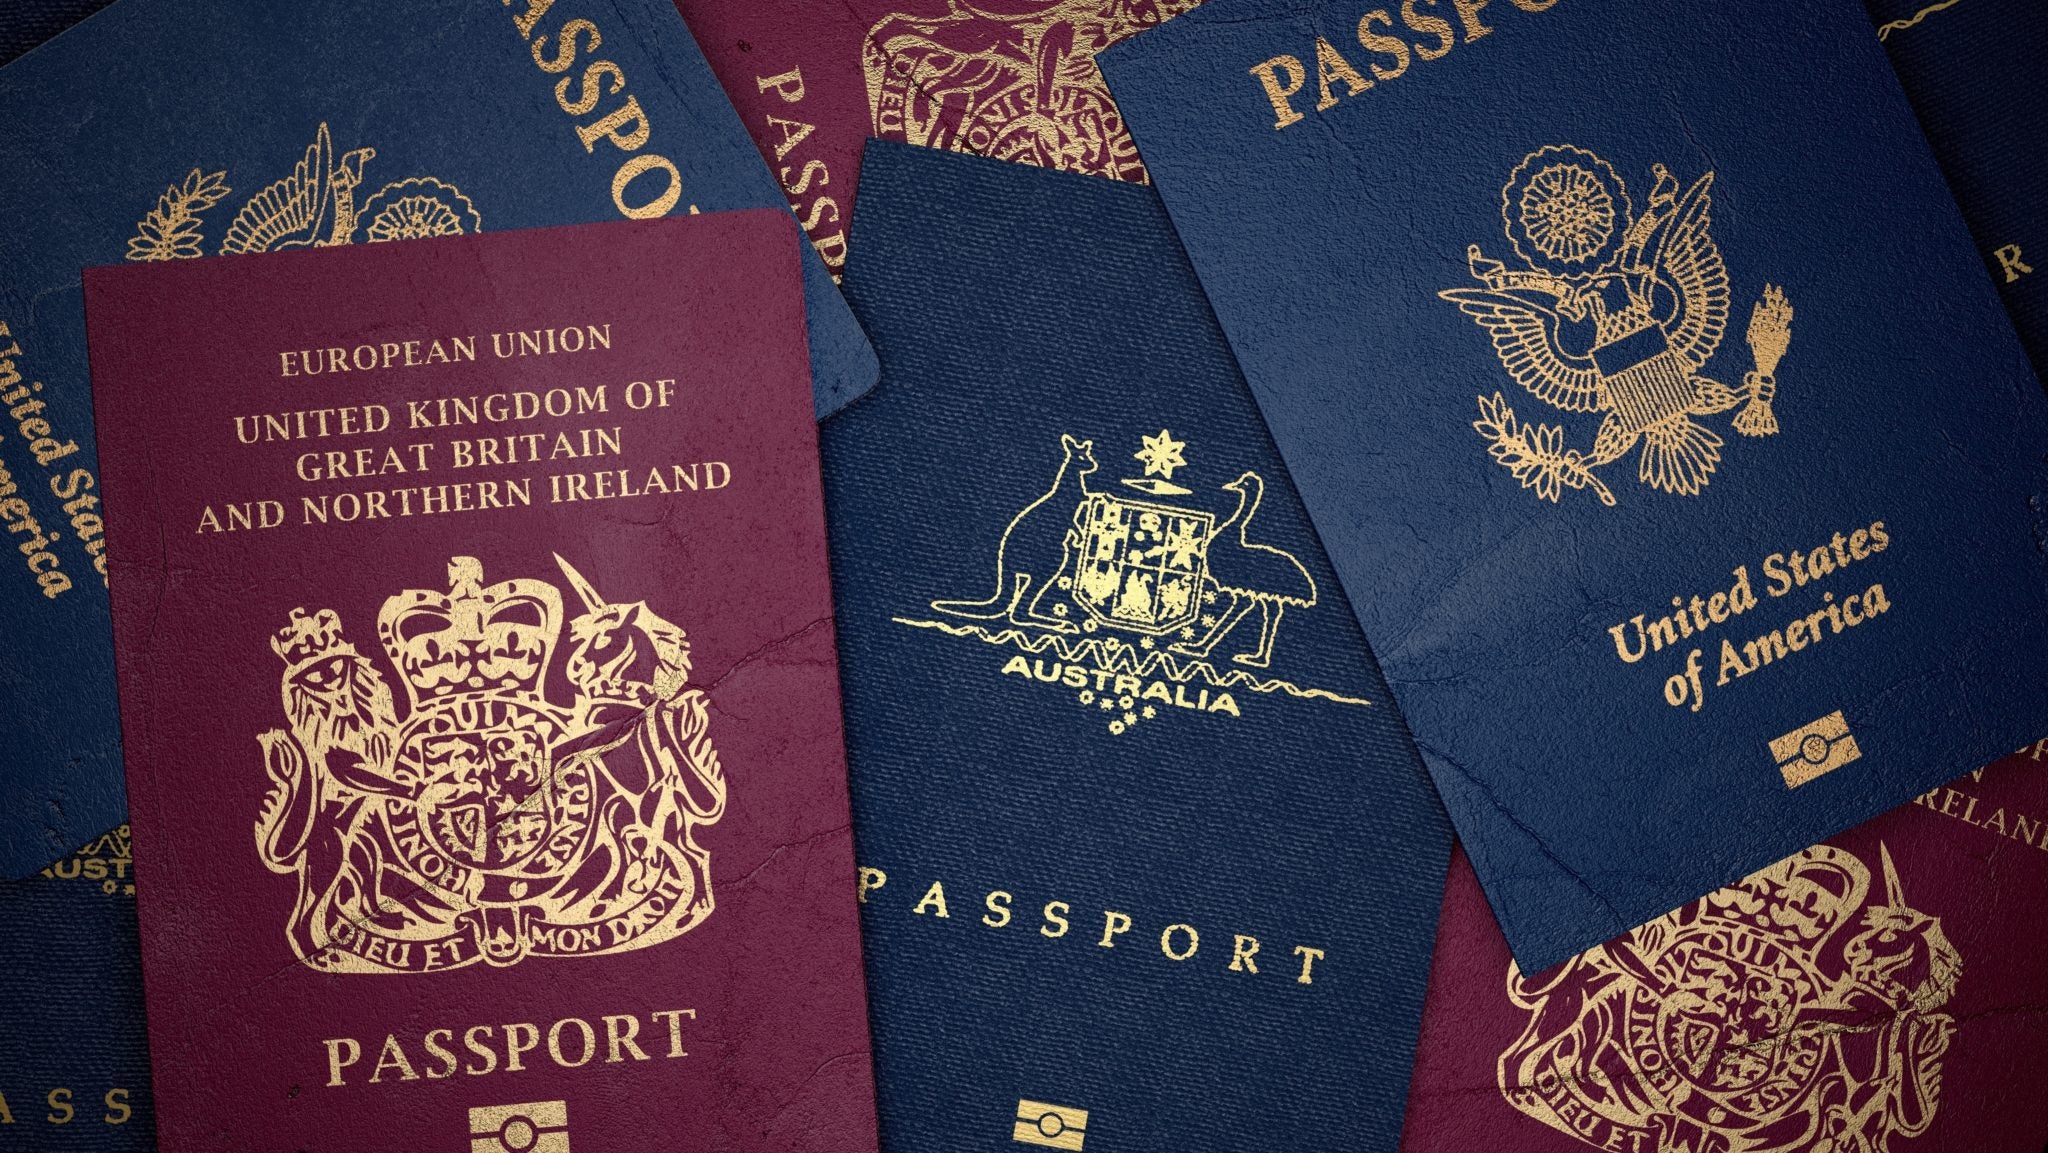 The Definitive U.S. Passport Application Guide for First Timers